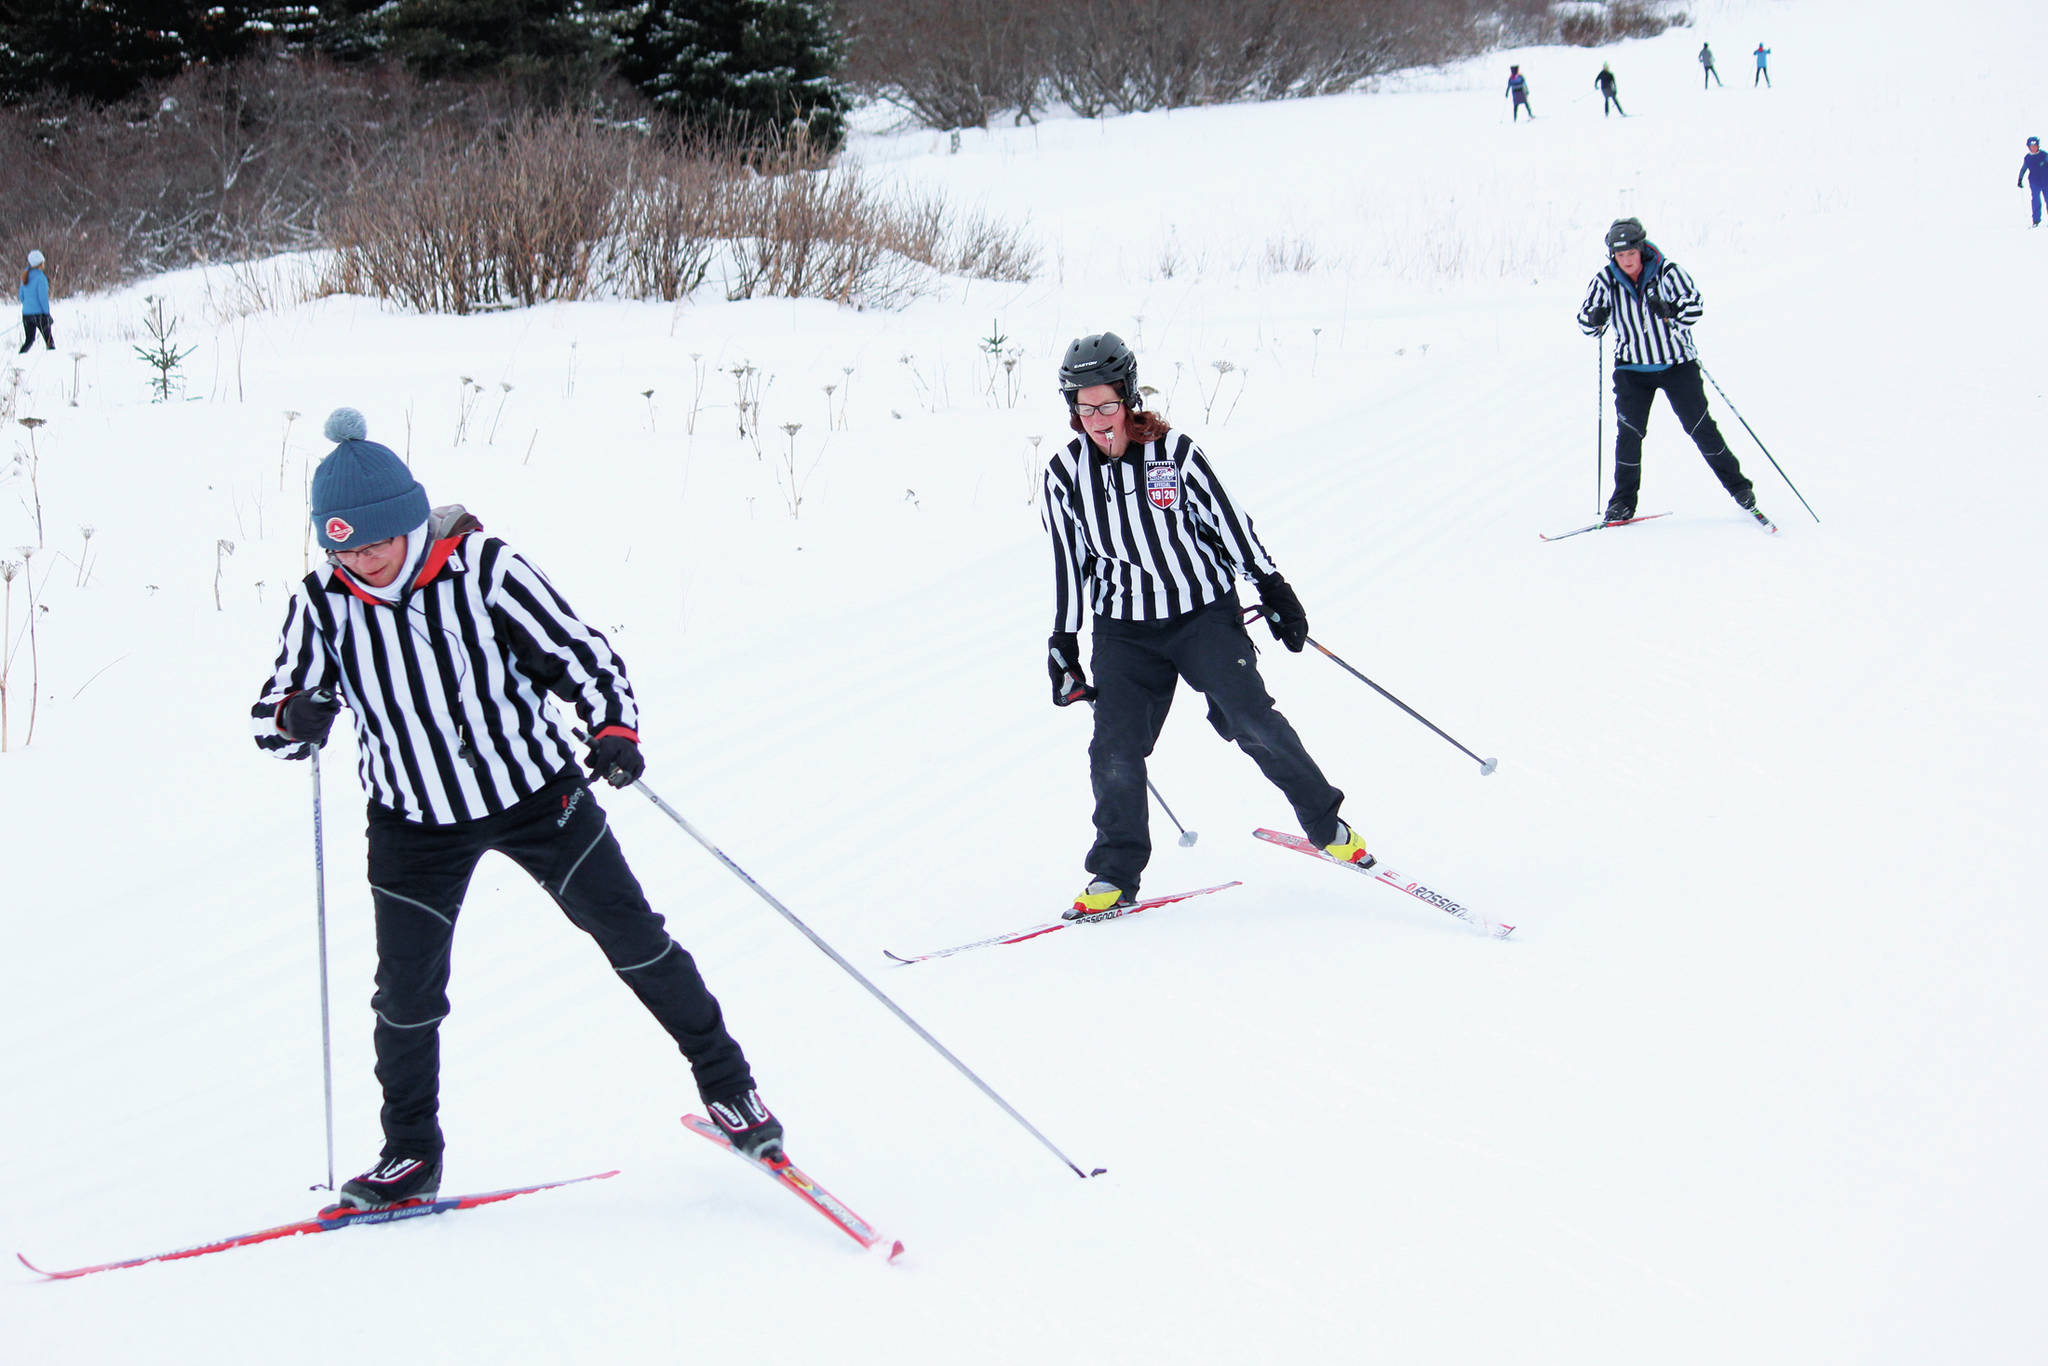 Three skiers dressed as referees ski up a hill during this year’s Ski for Women on Sunday, Feb. 2, 2020 at the Lookout Trails on Ohlson Mountain Road near Homer, Alaska. (Photo by Megan Pacer/Homer News)